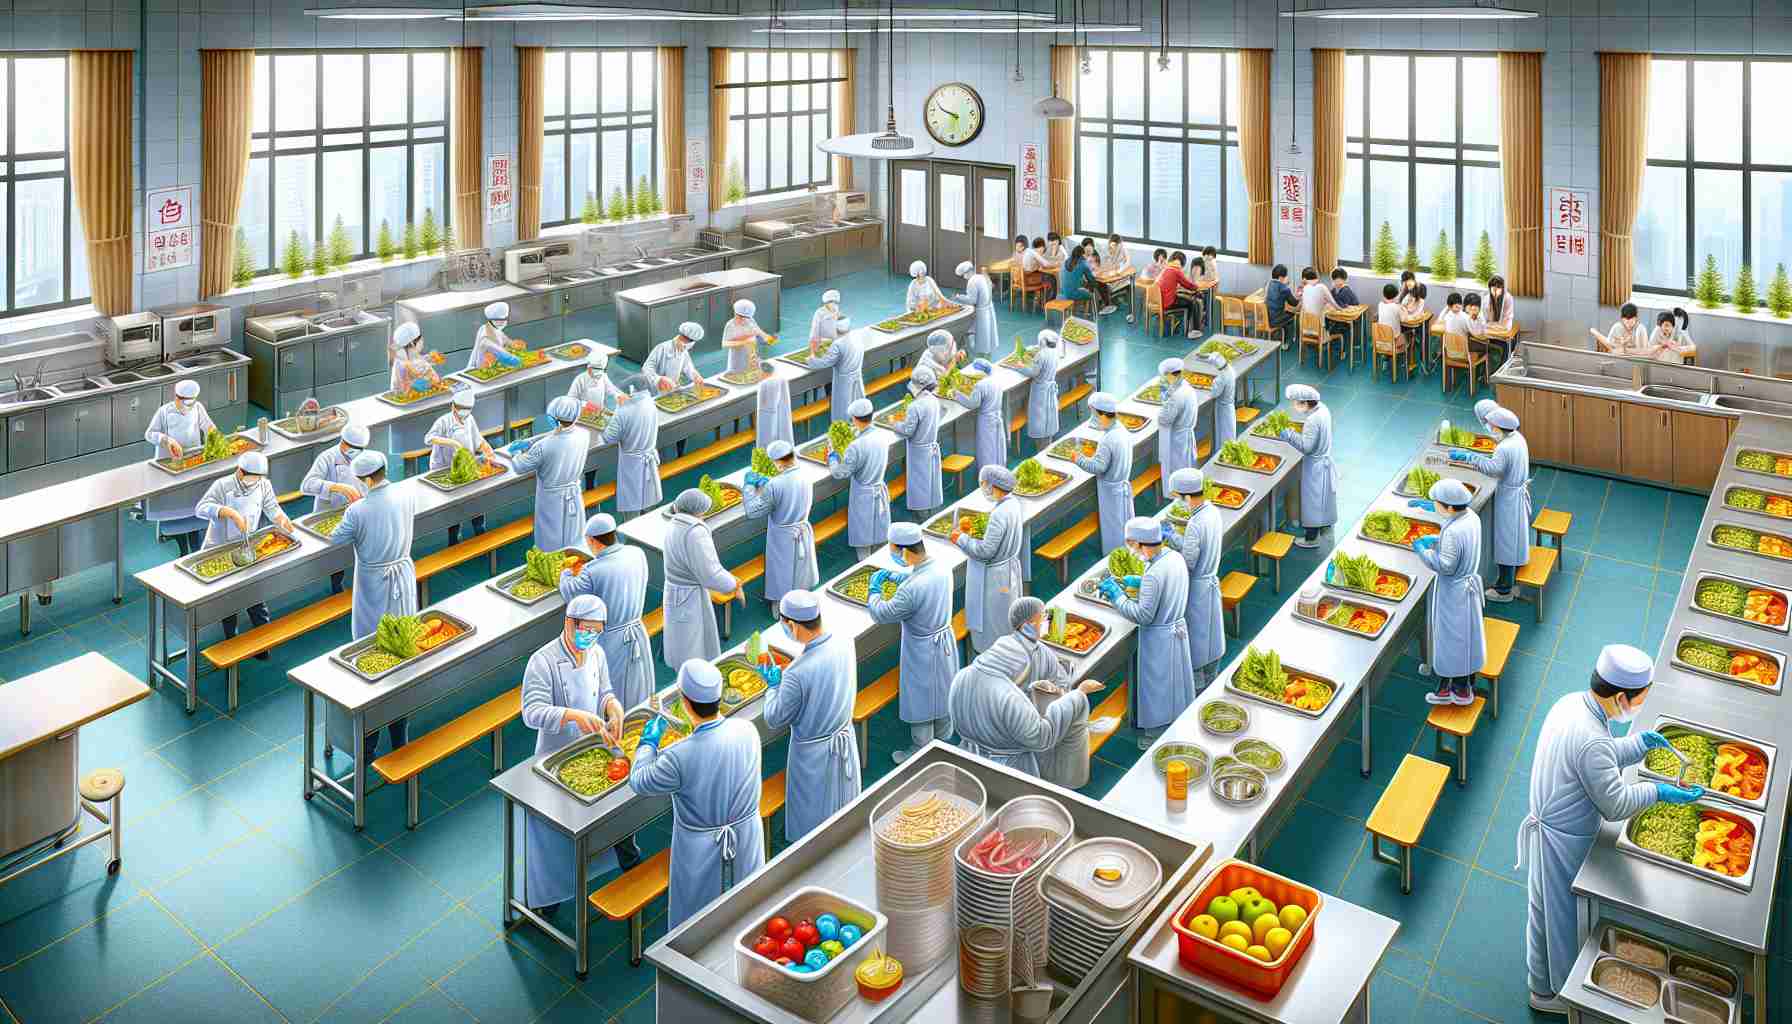 Joint Effort Strengthens Food Safety in Yongqing County Schools